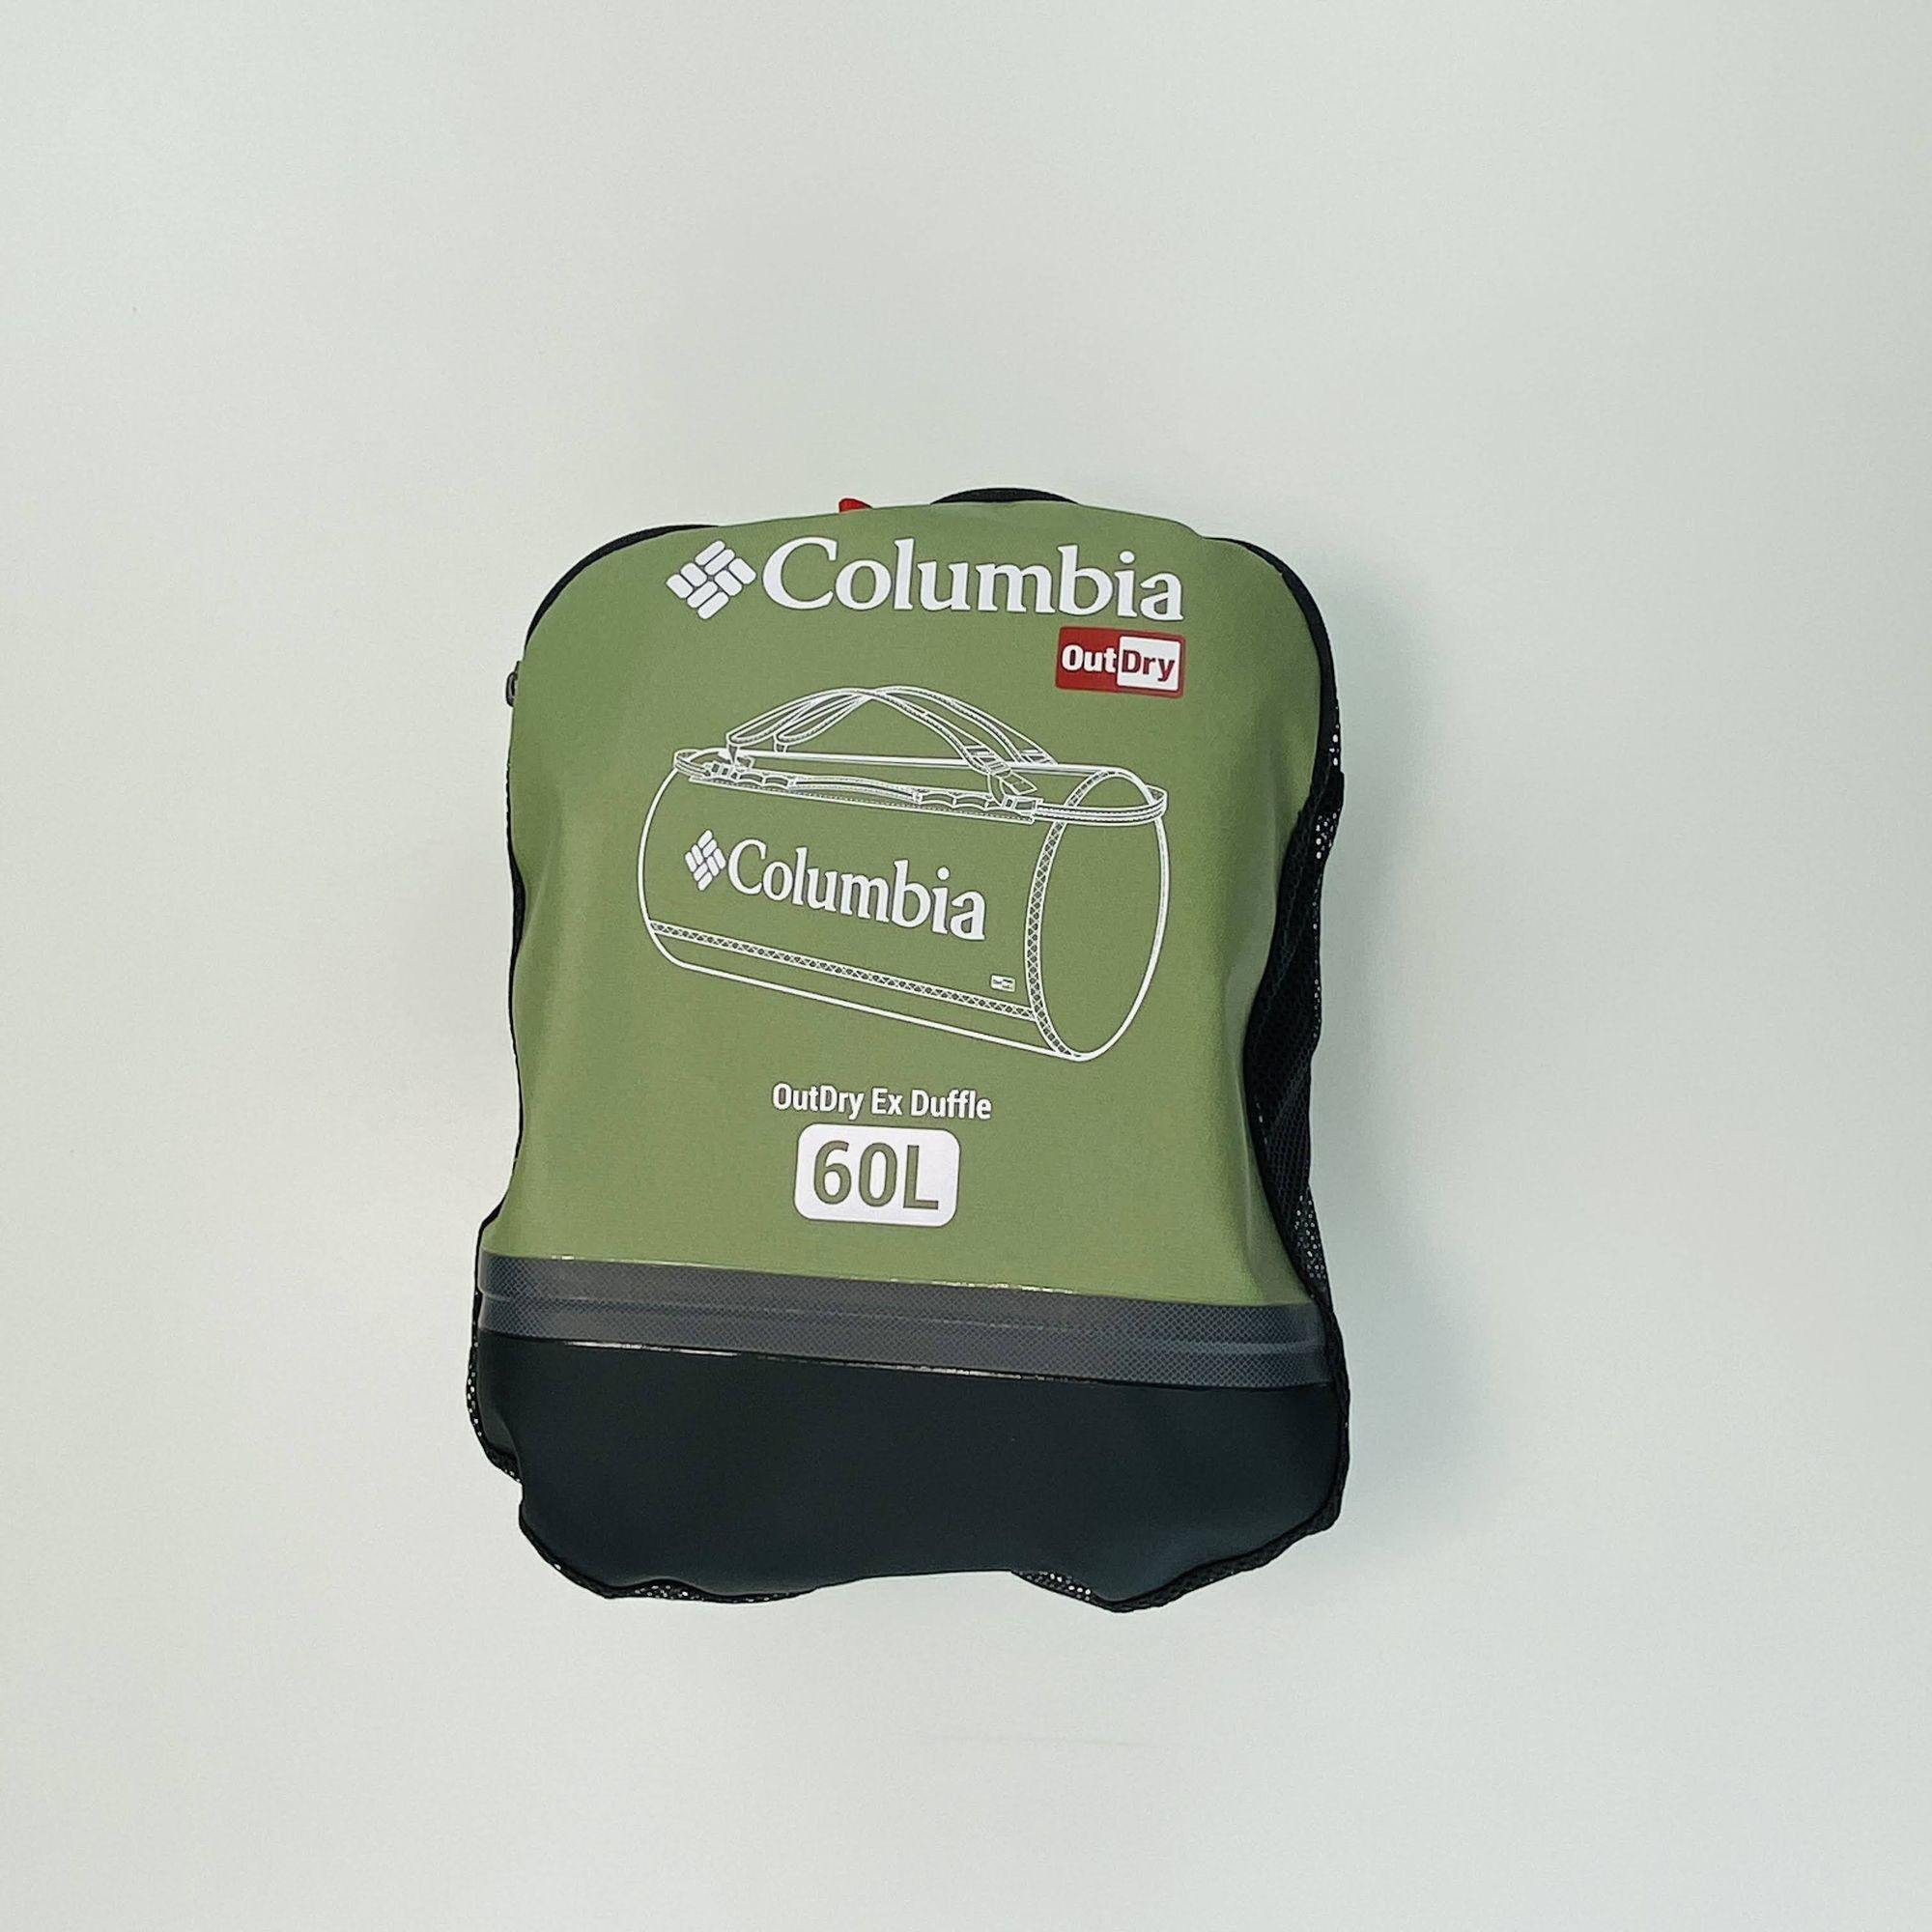 Columbia OutDry Ex™ 60L Duffle - Second hand Duffel Bag - Olivengrün - One Size | Hardloop